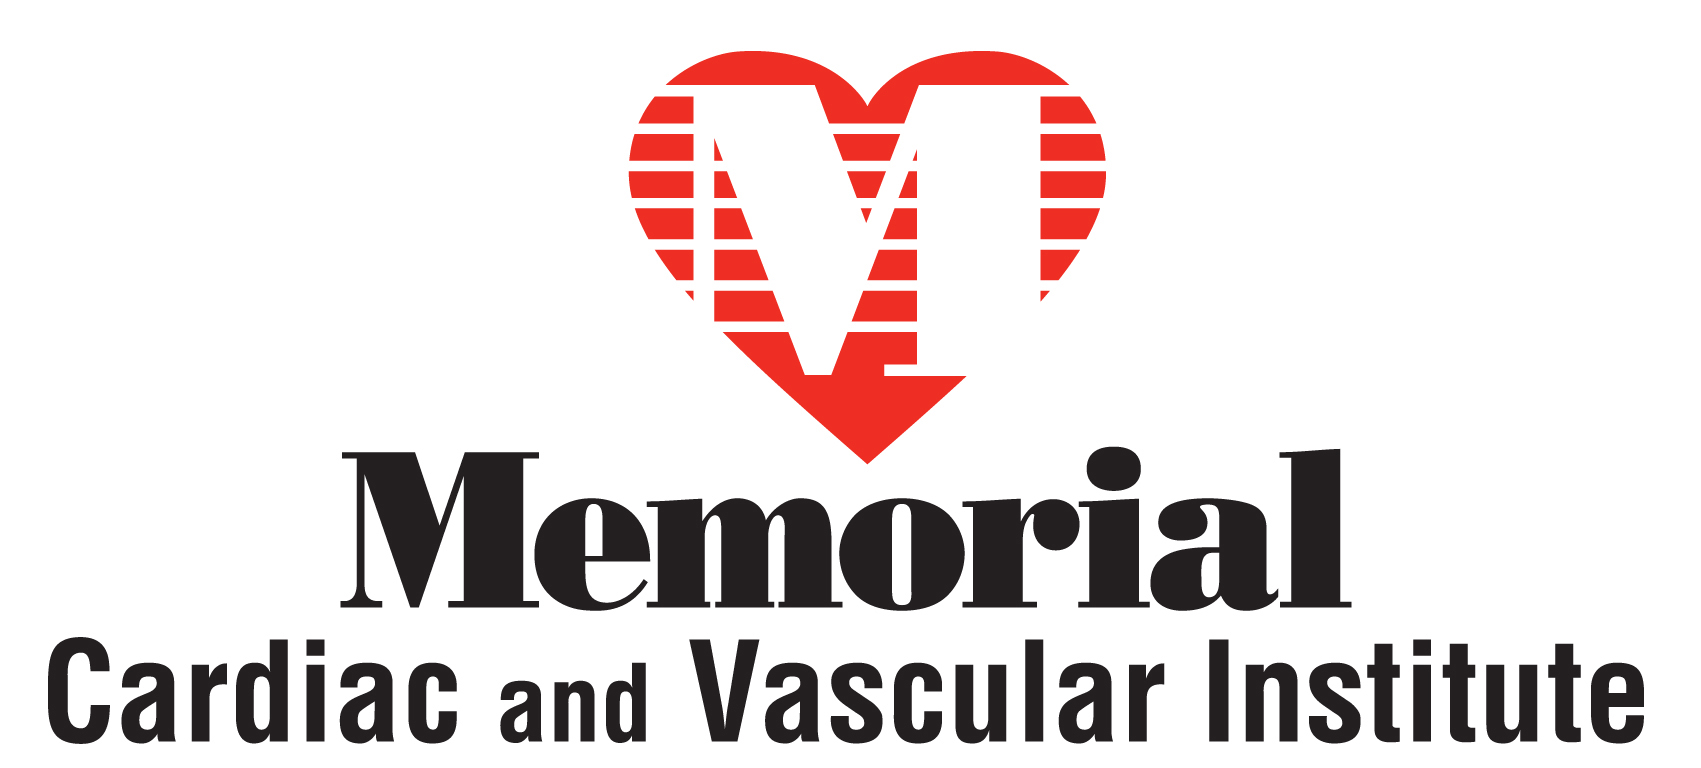 Memorial Cardiac and Vascular Institute is a cardiovascular care leader, offering a wide array of services dedicated to the prevention, detection, and treatment of cardiovascular disease.